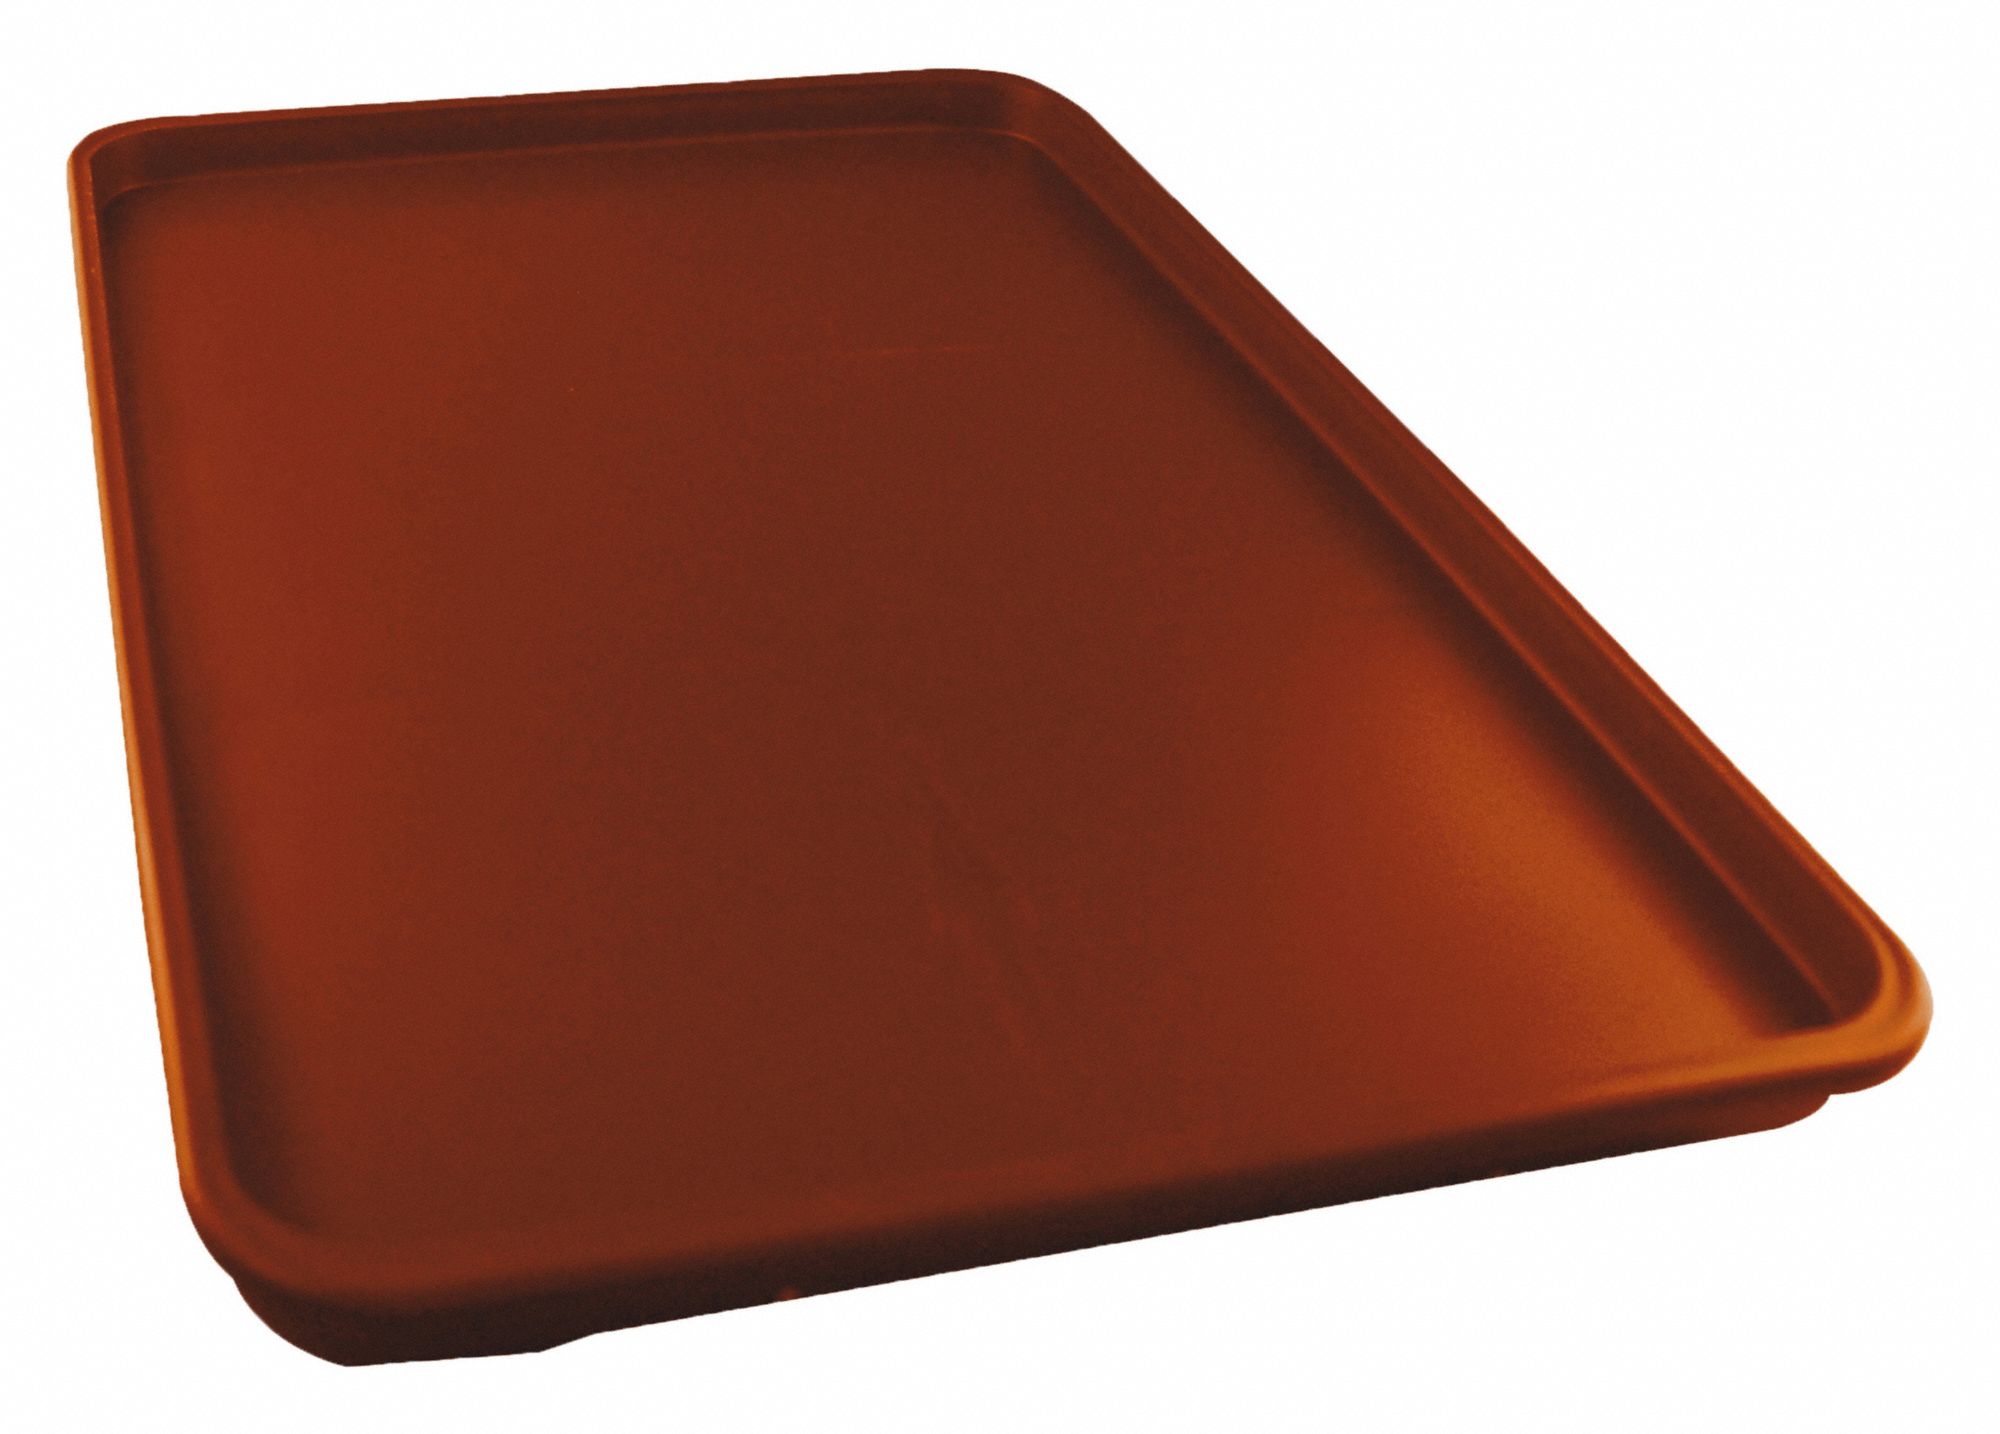 Rock Food Tray Lid Terra Cotta: w/ Compartments, 1 1/4 in Overall Dp, Brown, 10 PK